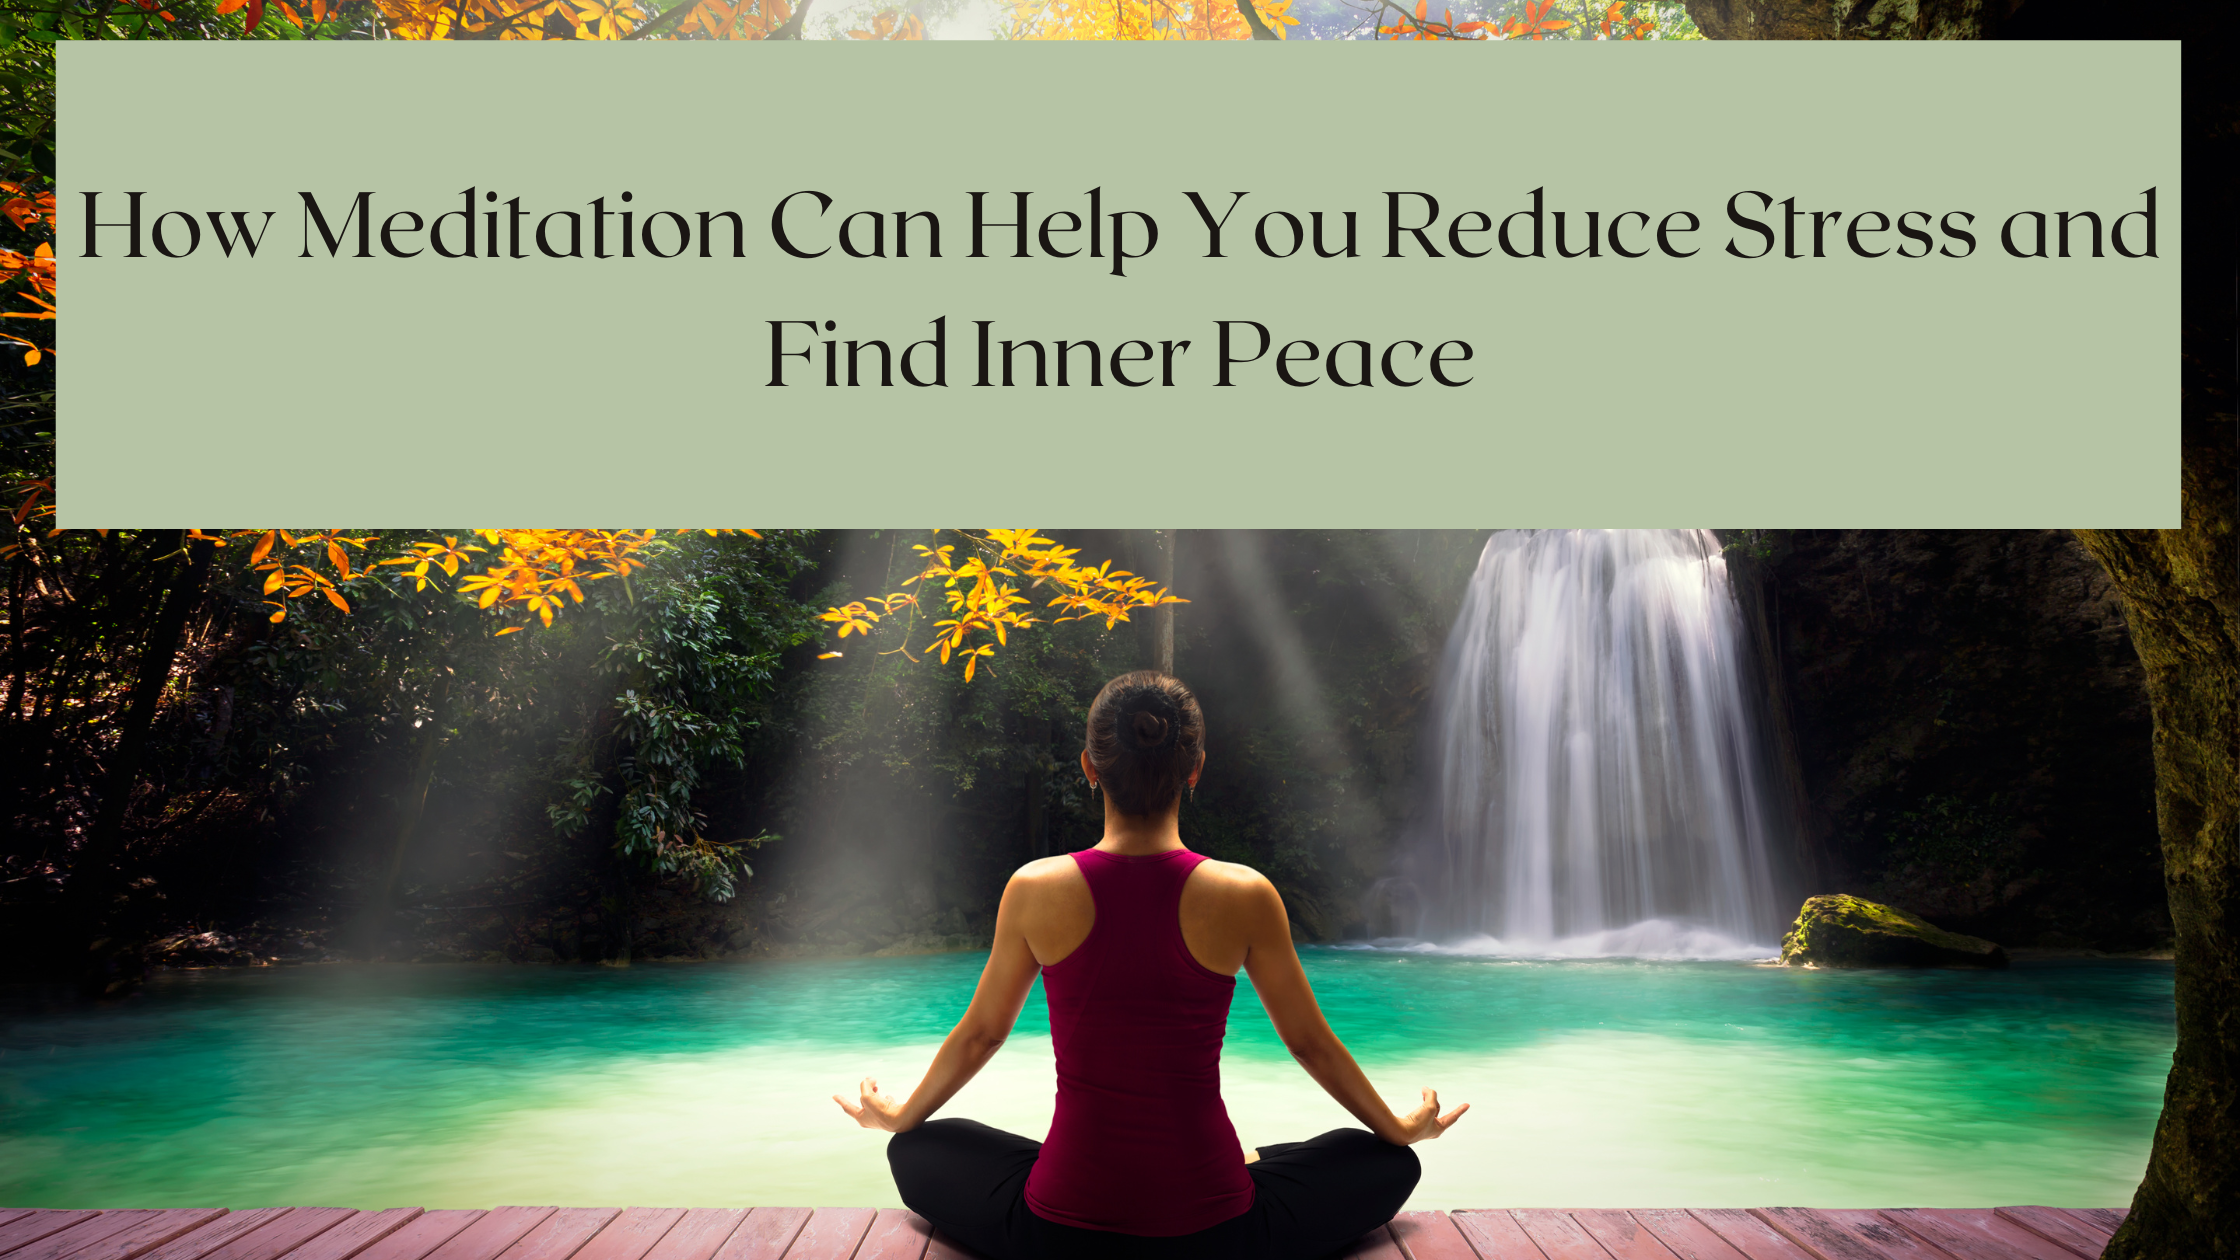 How Meditation Can Help You Reduce Stress and Find Inner Peace